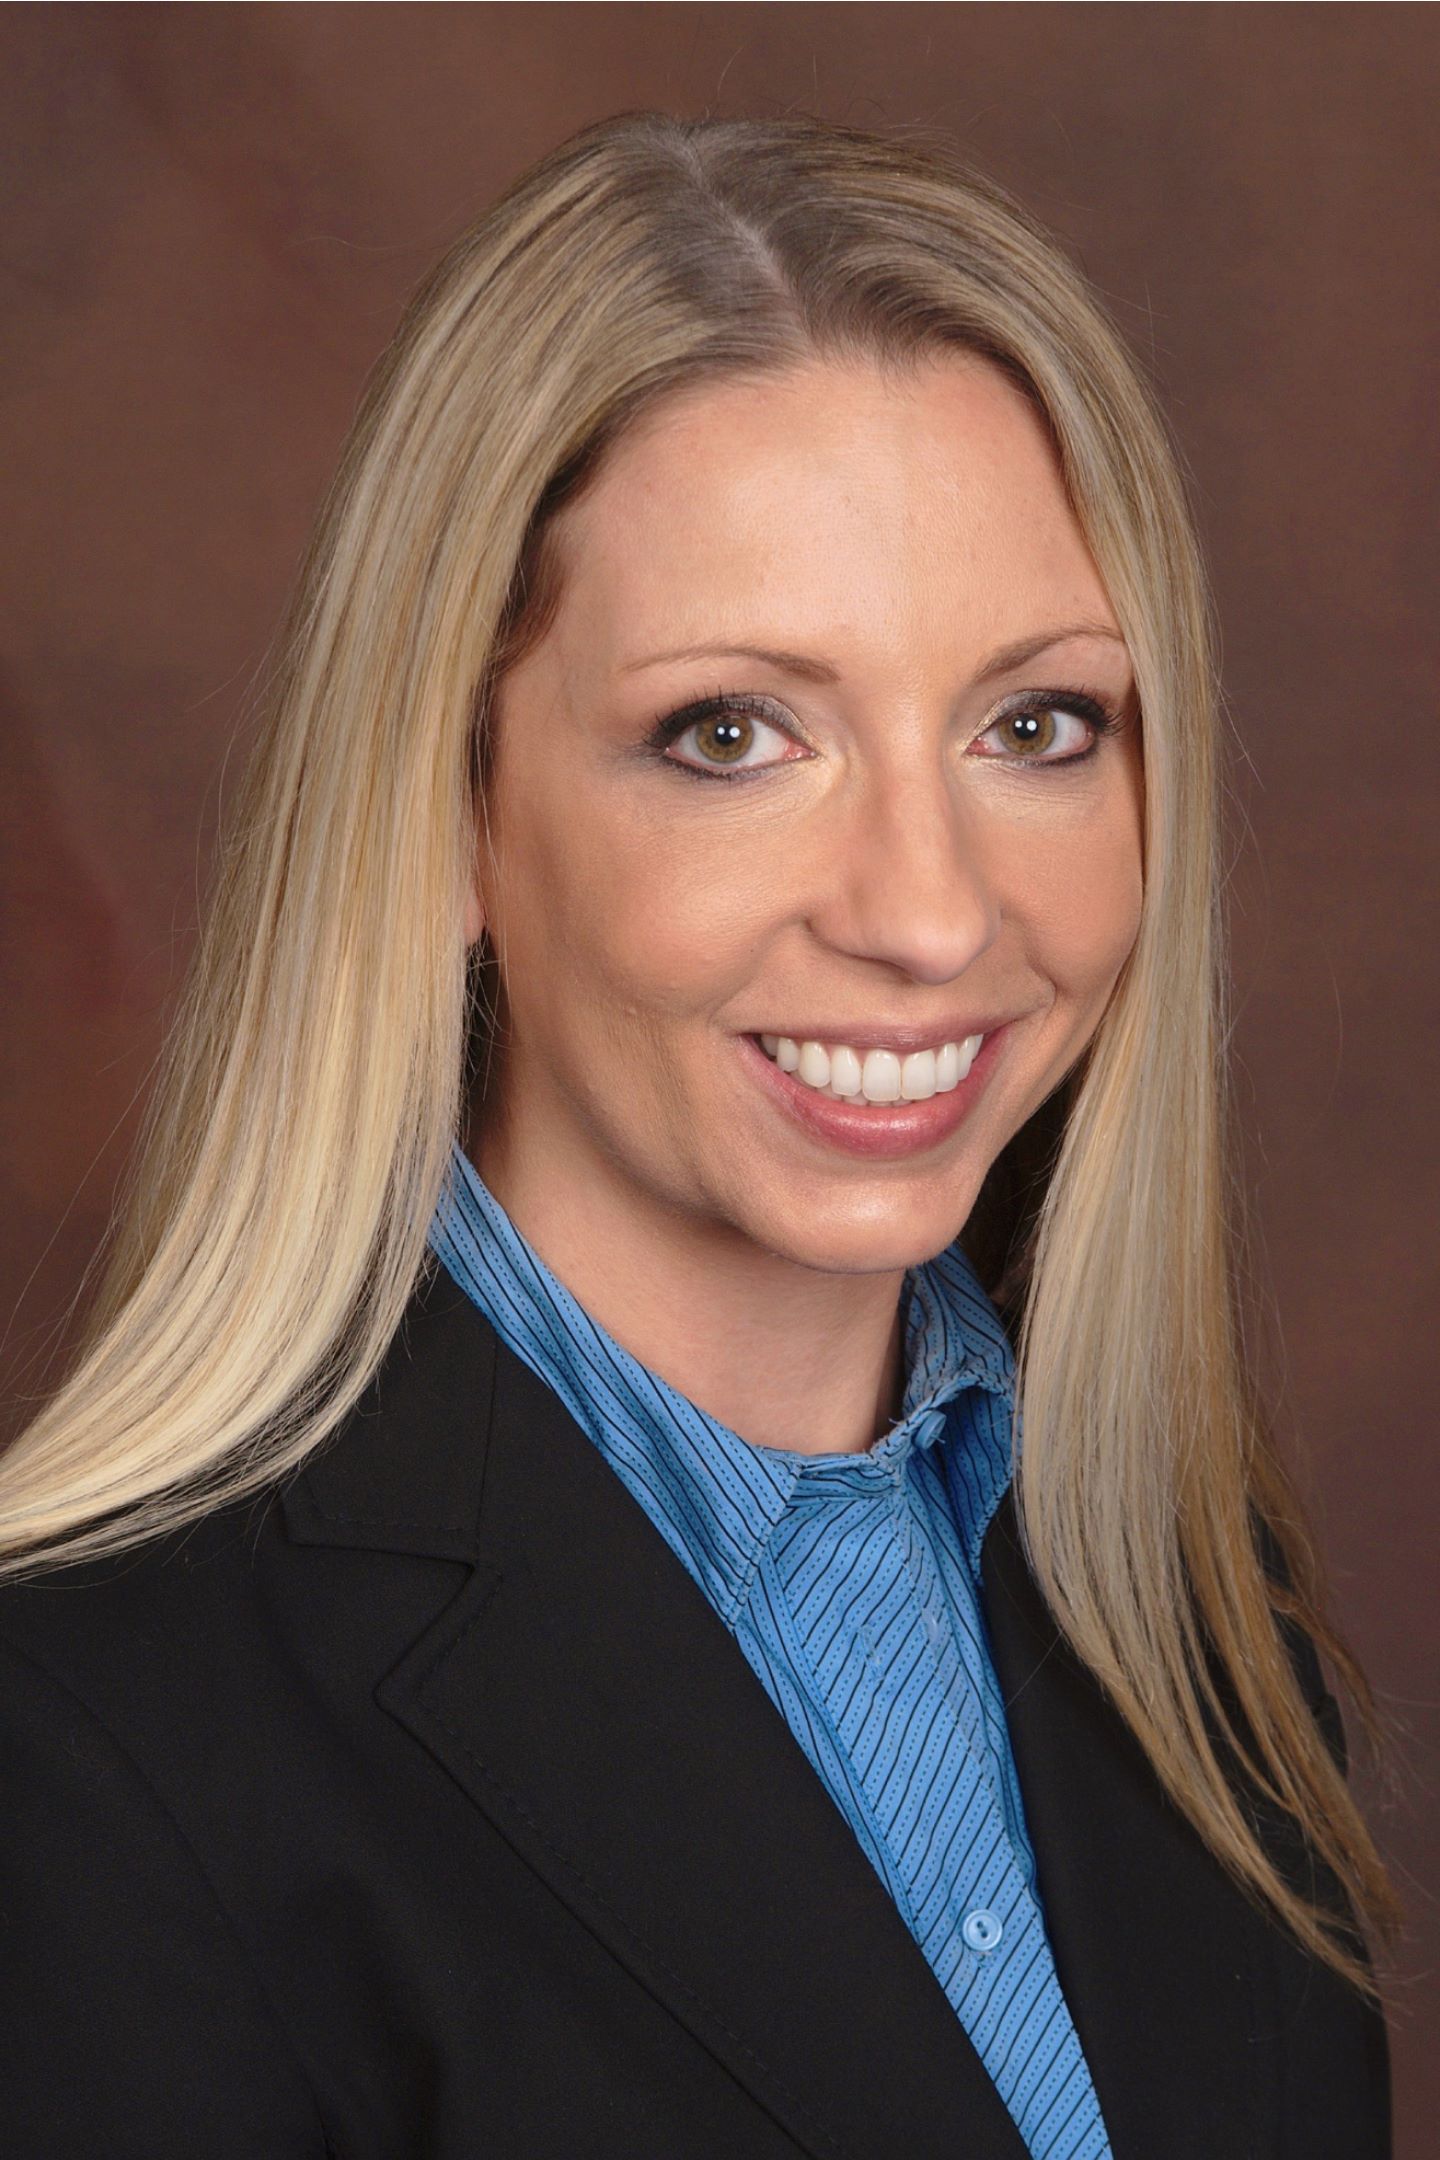 Rachel Stapley Real Estate Agent Wheaton Il Coldwell Banker Residential Brokerage